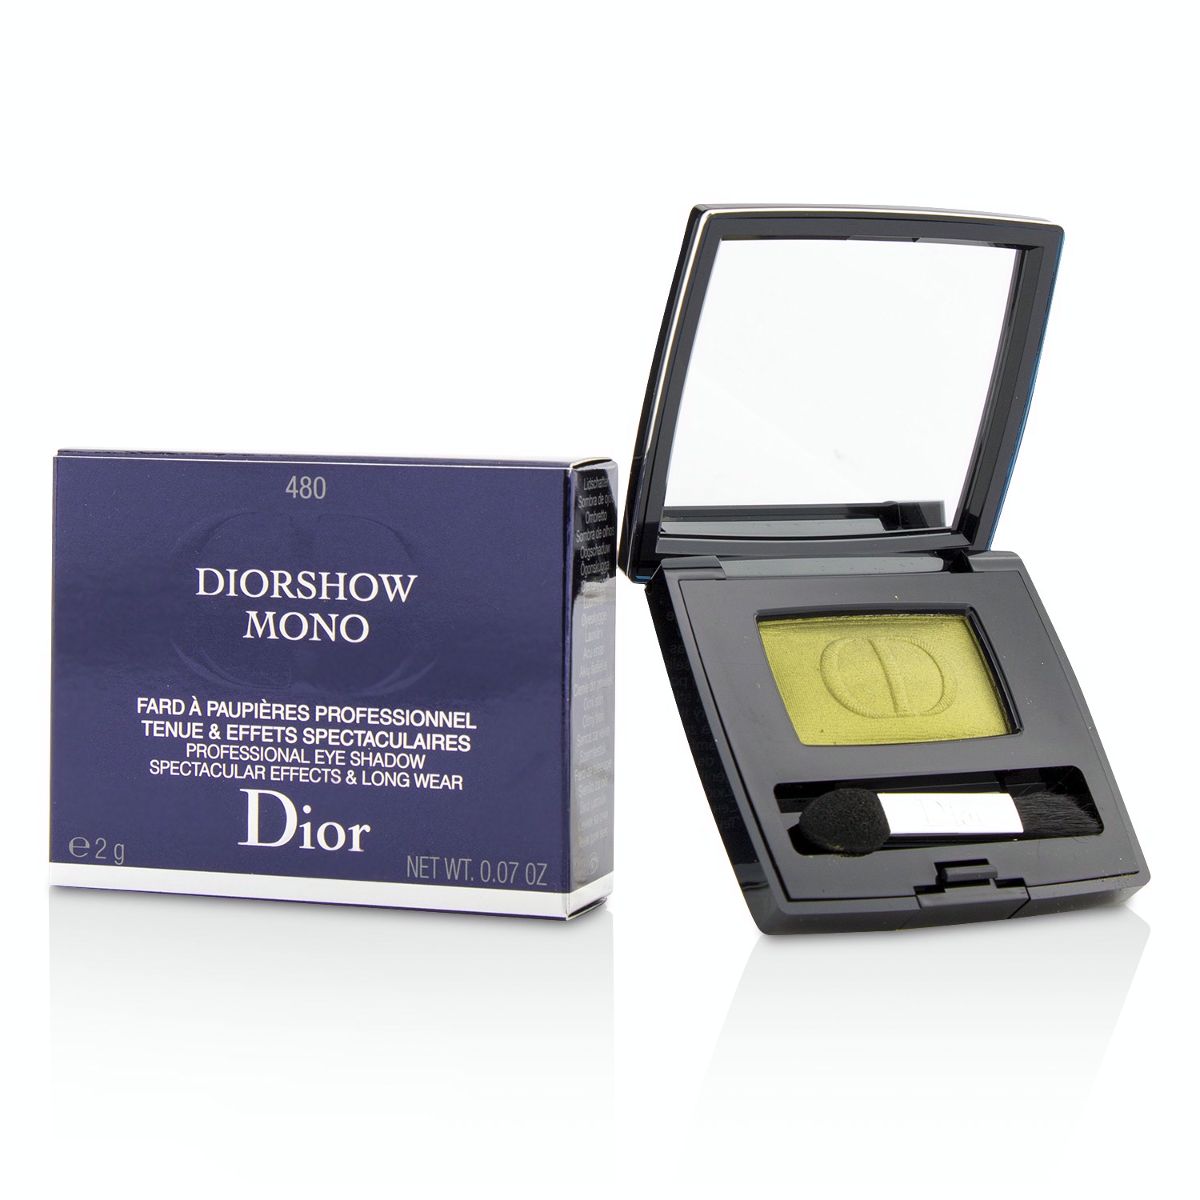 Diorshow Mono Professional Spectacular Effects  Long Wear Eyeshadow - # 480 Nature Christian Dior Image